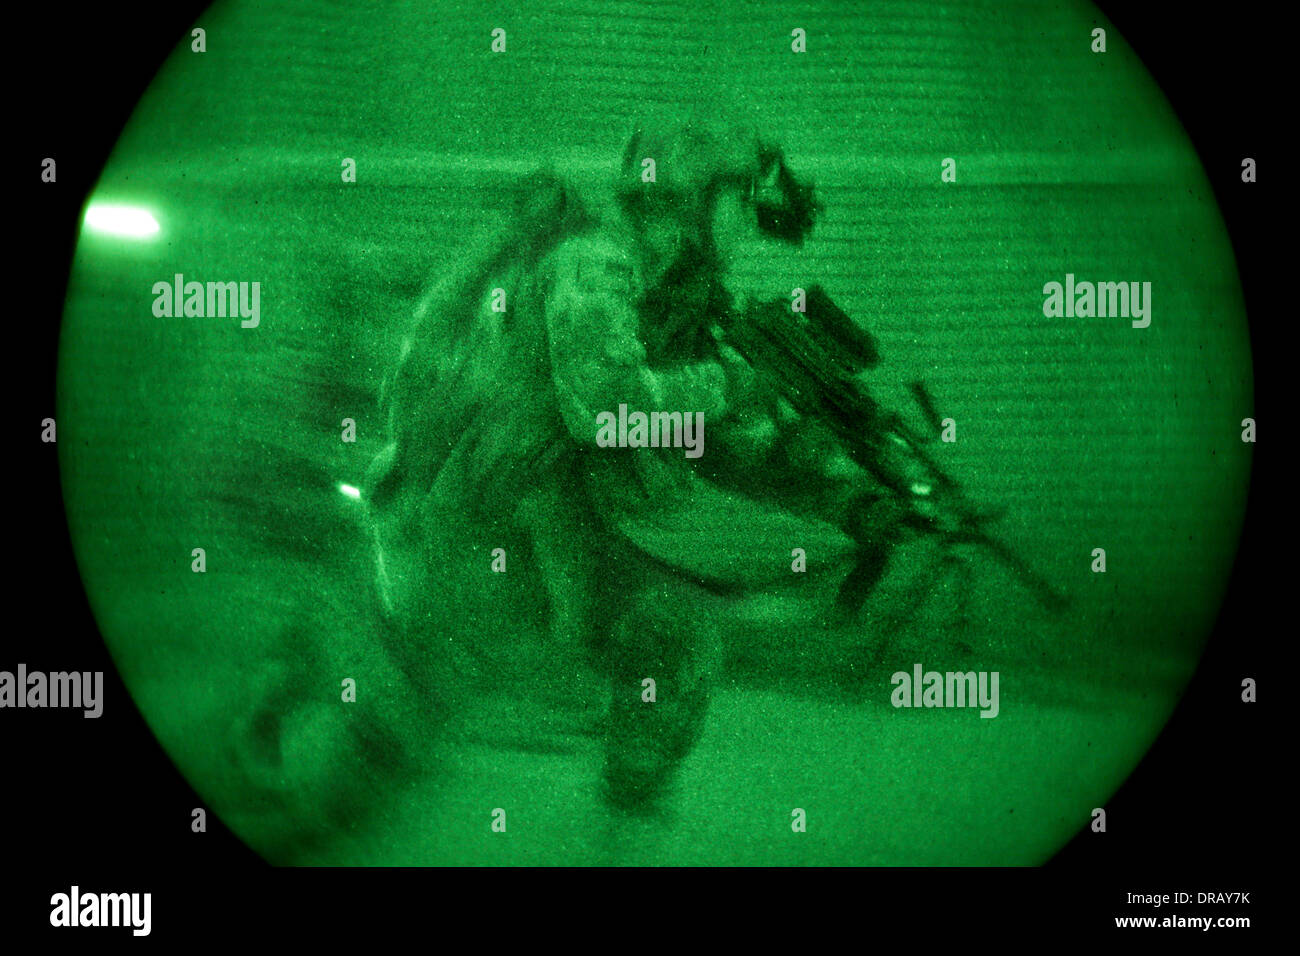 U.S. Army soldier seen through night-vision googles during close quarters marksmanship training, Afghanistan Stock Photo